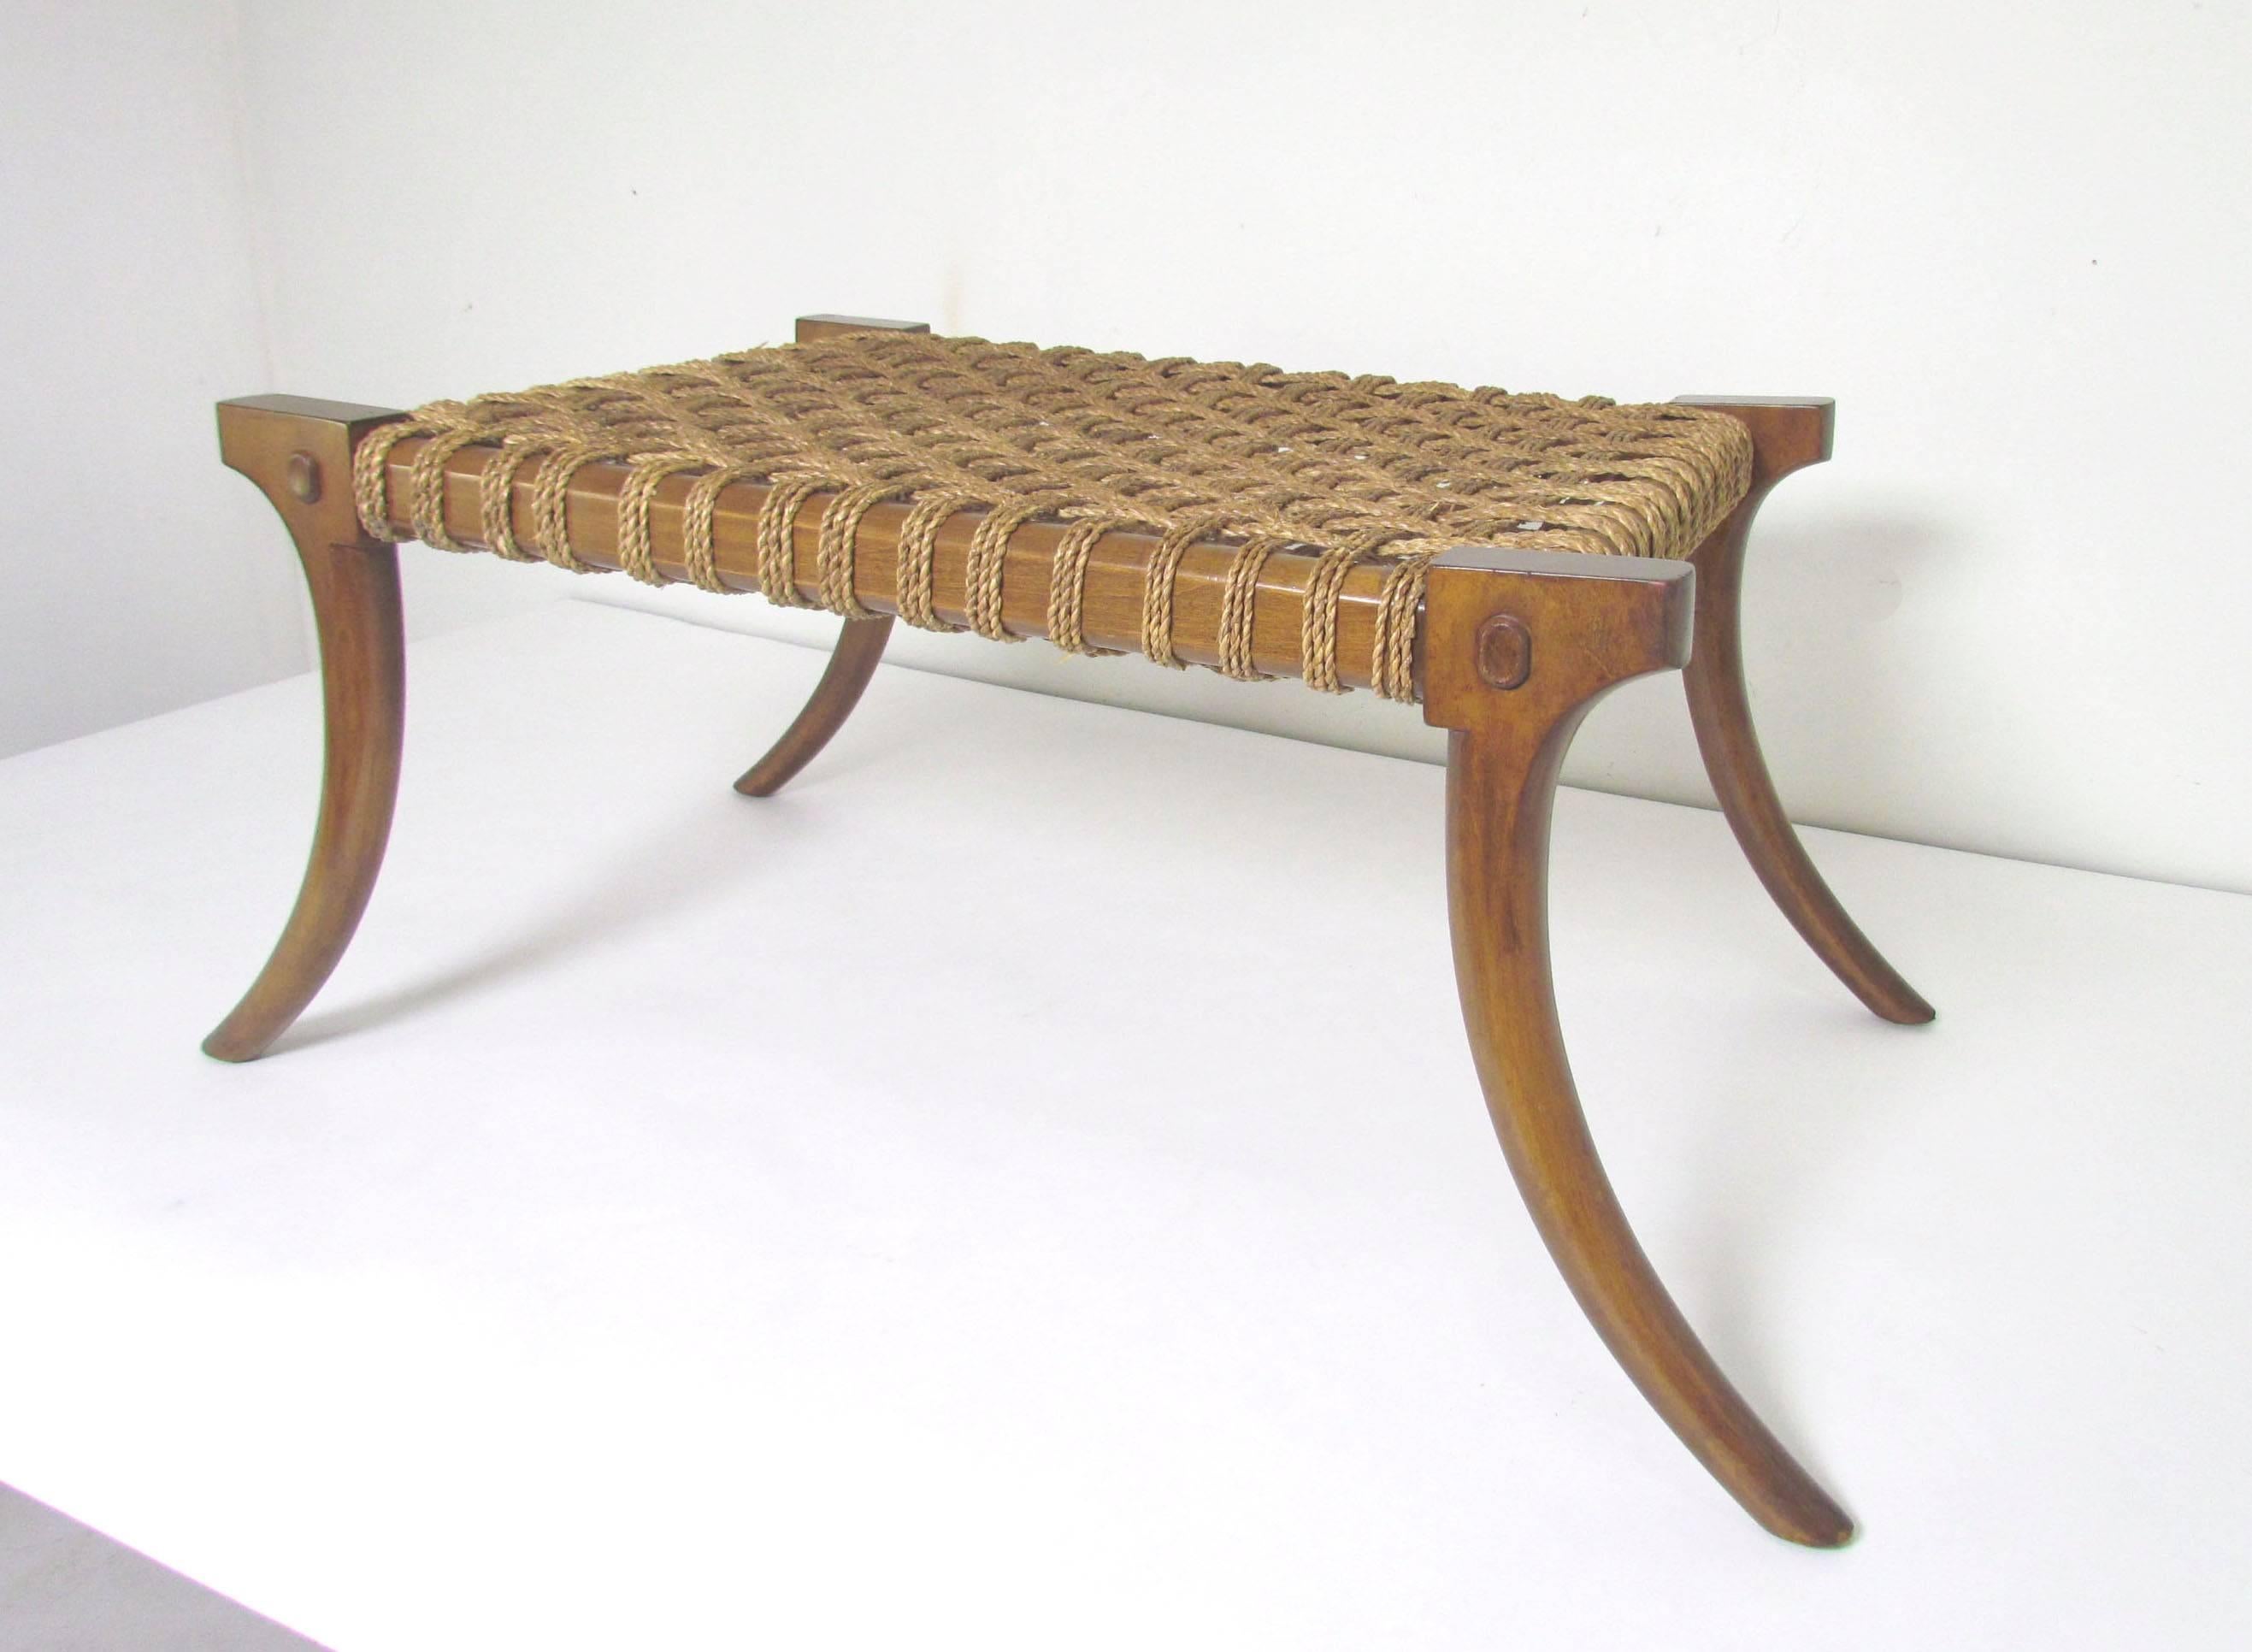 Klismos style bench form coffee table in a particularly large size, 42.5